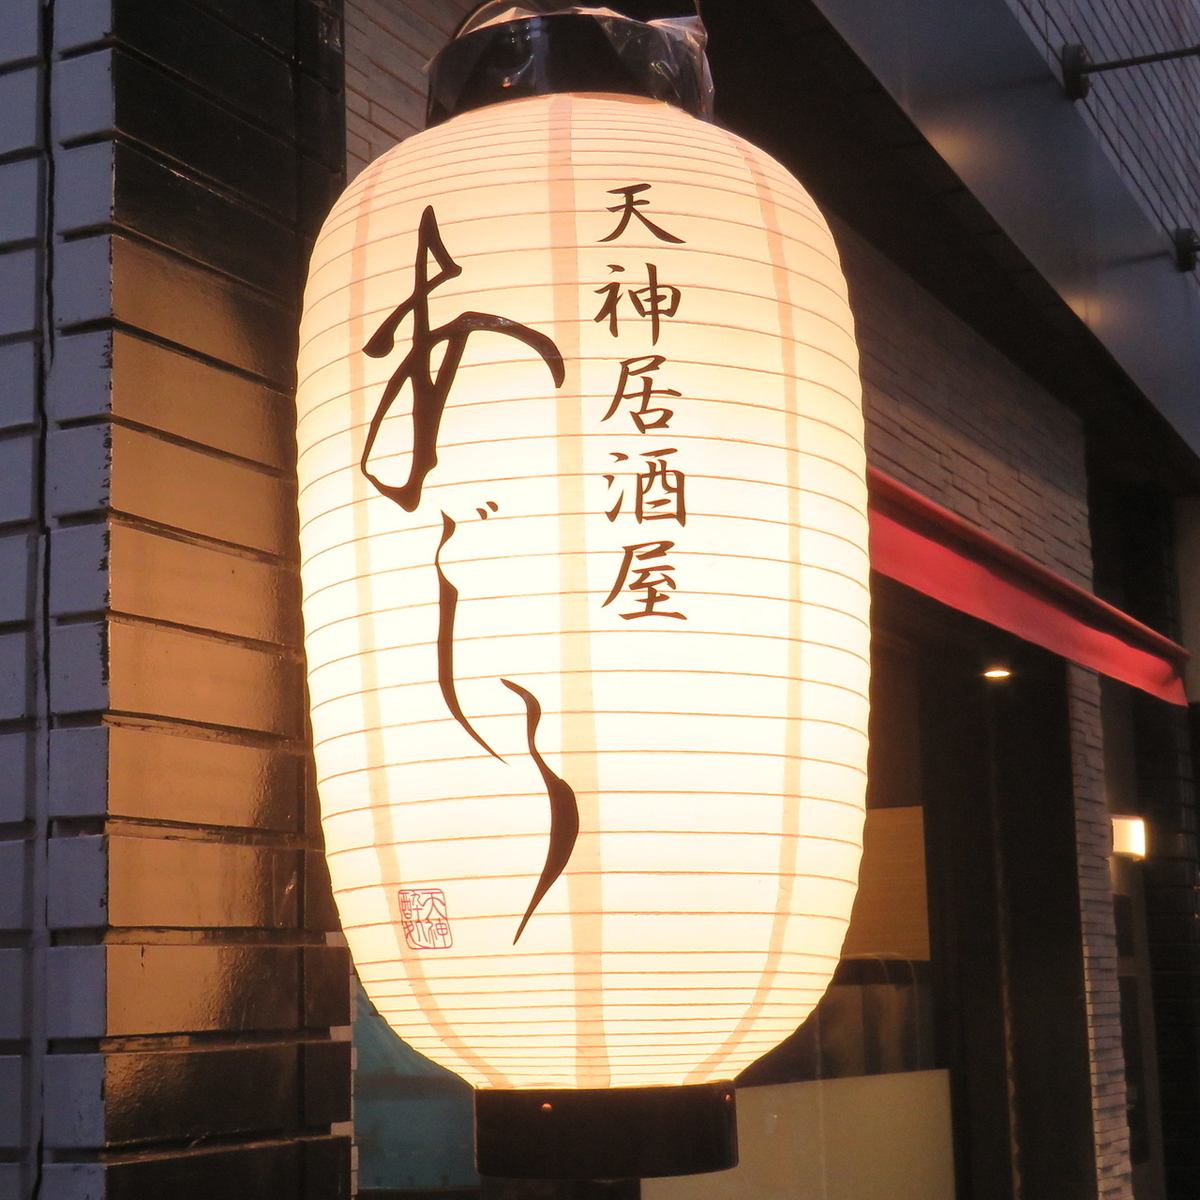 Enjoy authentic Japanese food at a reasonable price!